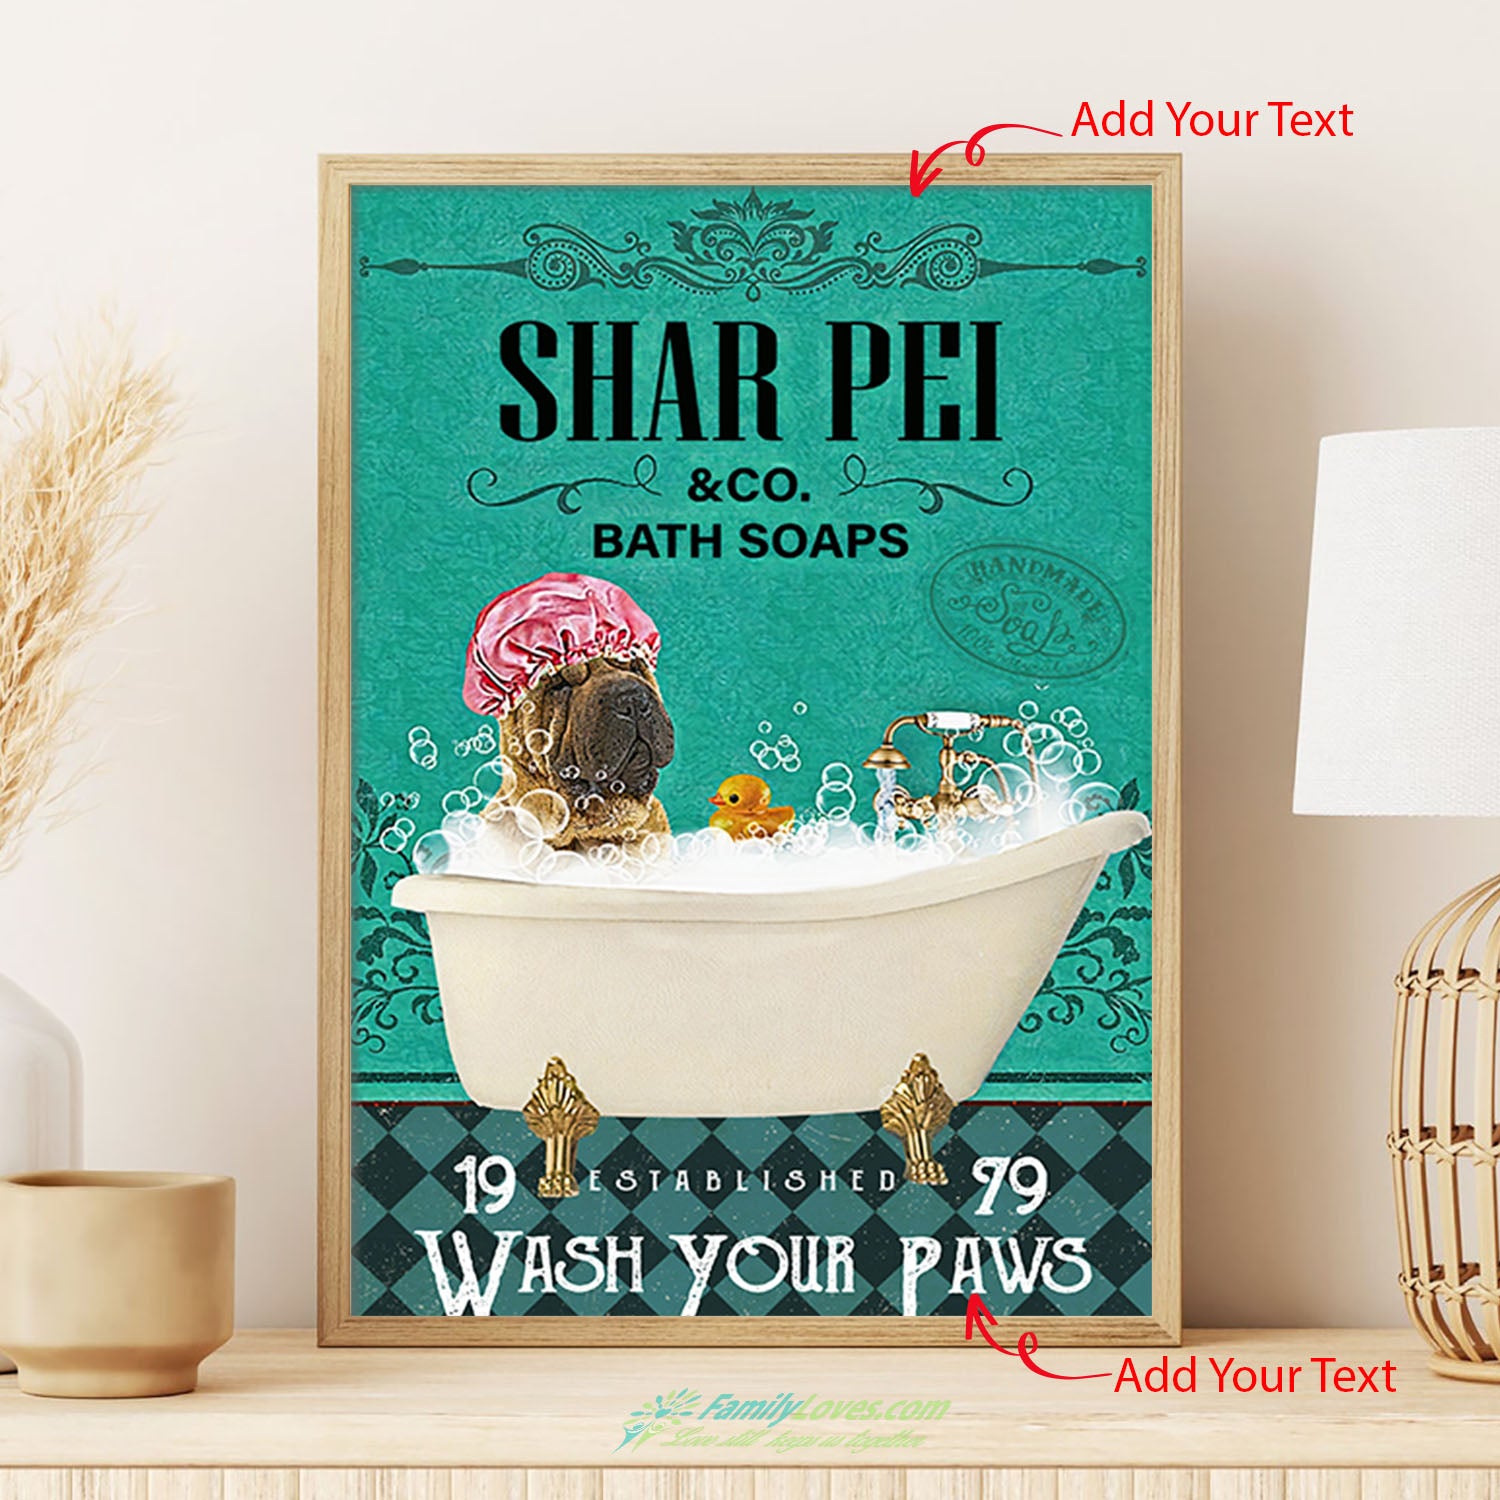 Shar Pei And Co Bath Soaps Wash Your Paws Canvases For Painting Poster Decor All Size 1